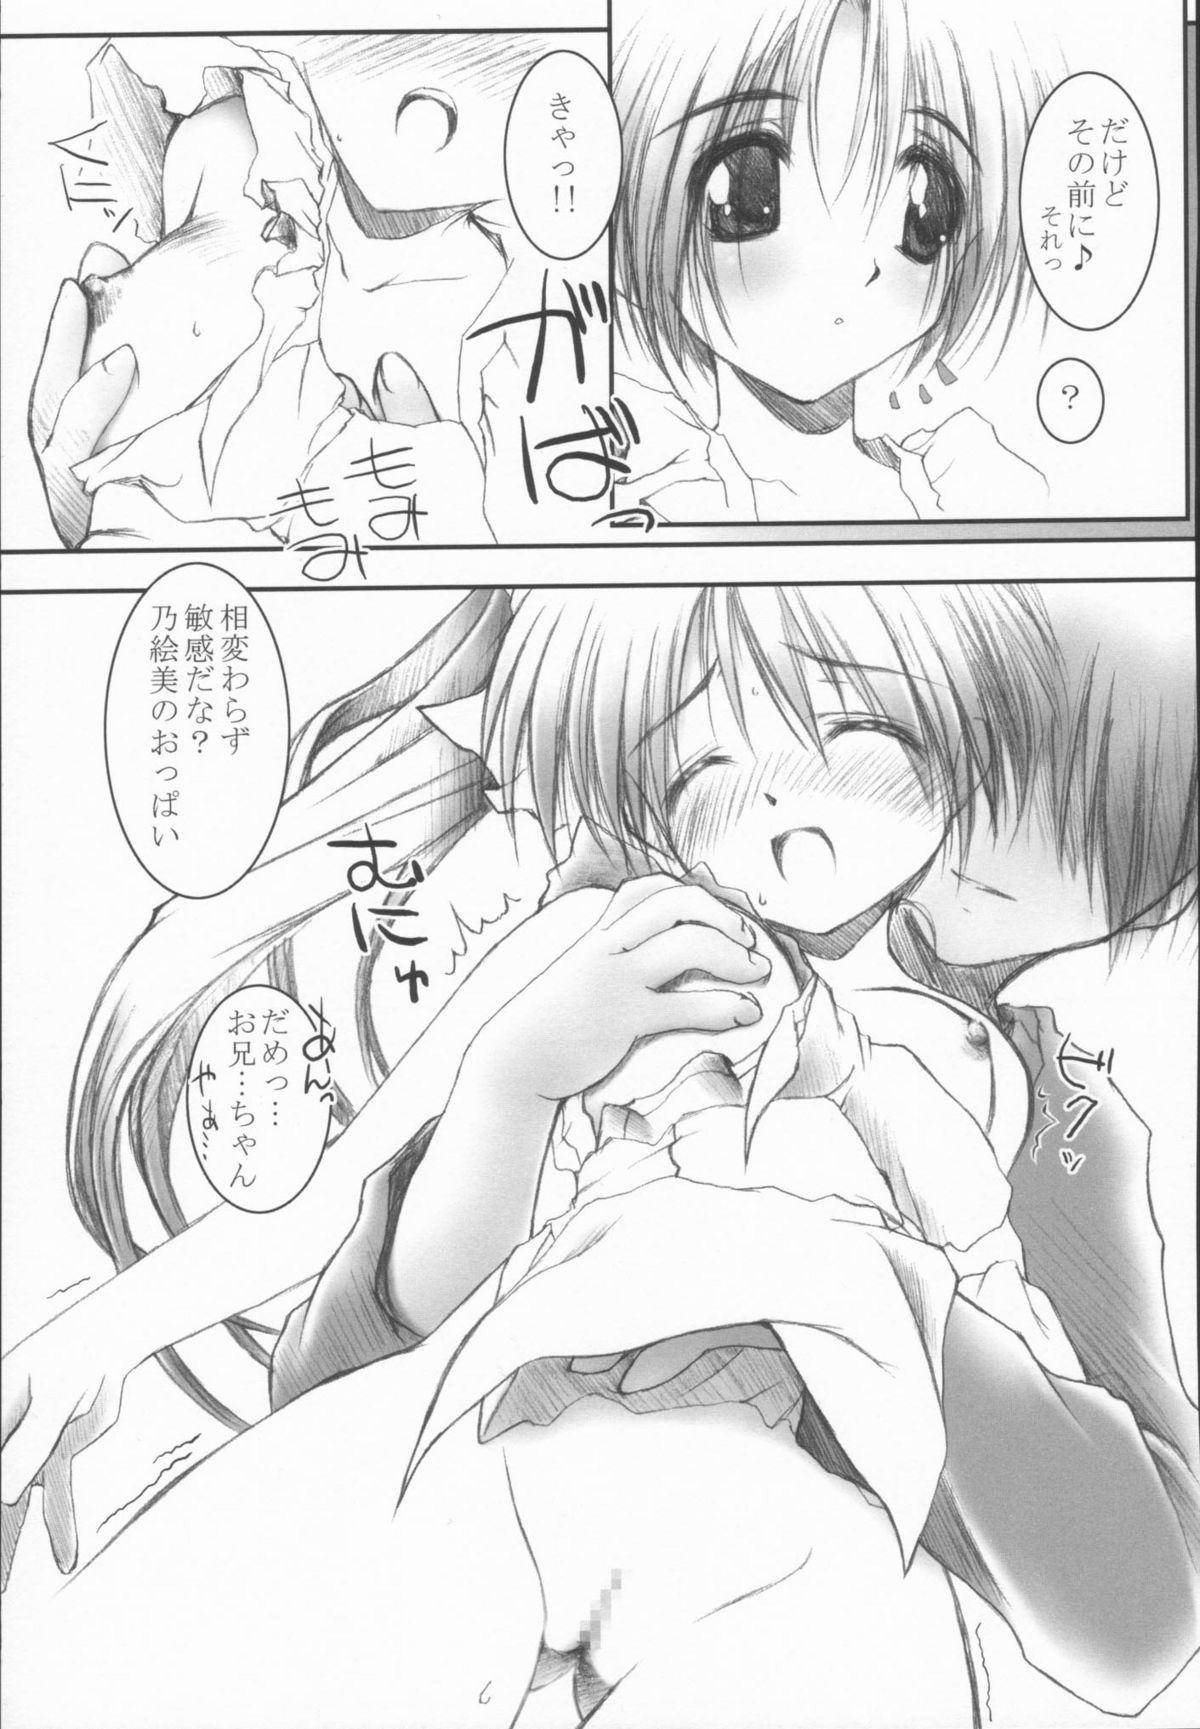 Gets Summer Snow 2 - With you Suigetsu Petite Teen - Page 10